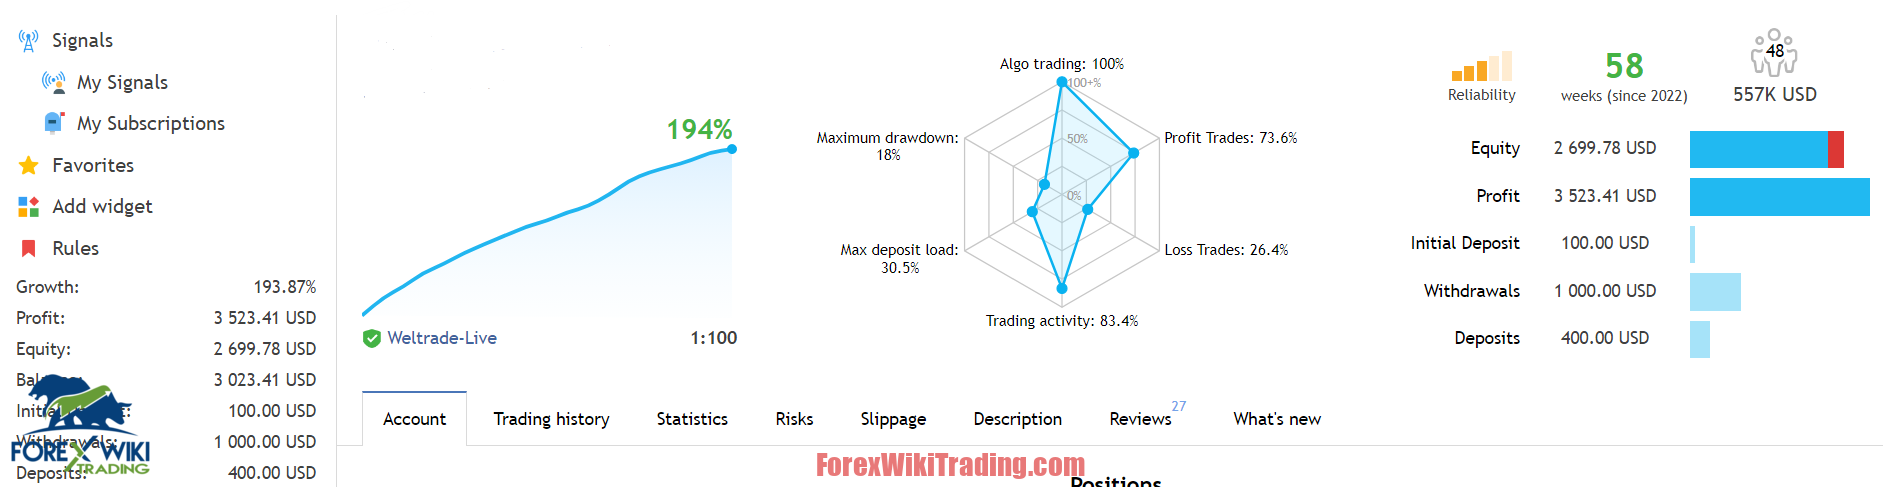 Forex Virtual Trade Robot MT4 : An EA for Efficient Trading 16